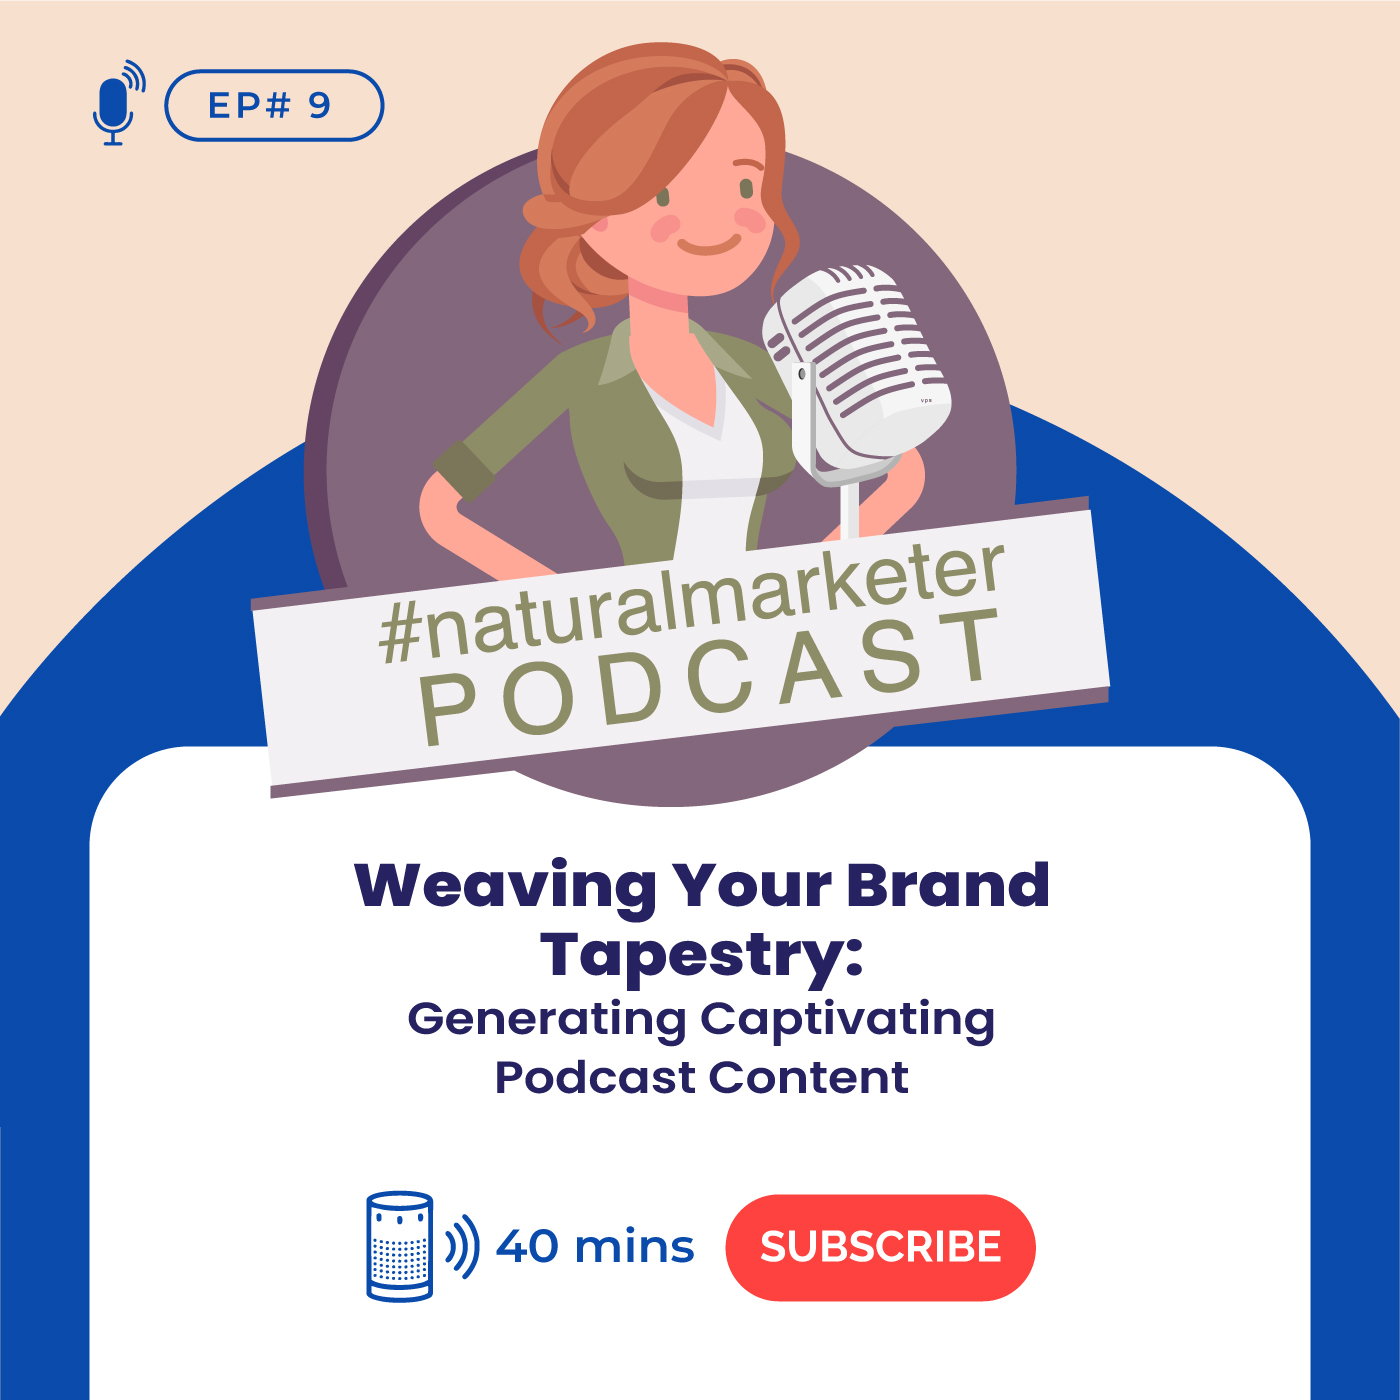 Episode 9: Weaving Your Brand Tapestry, Generating Captivating Podcast Content